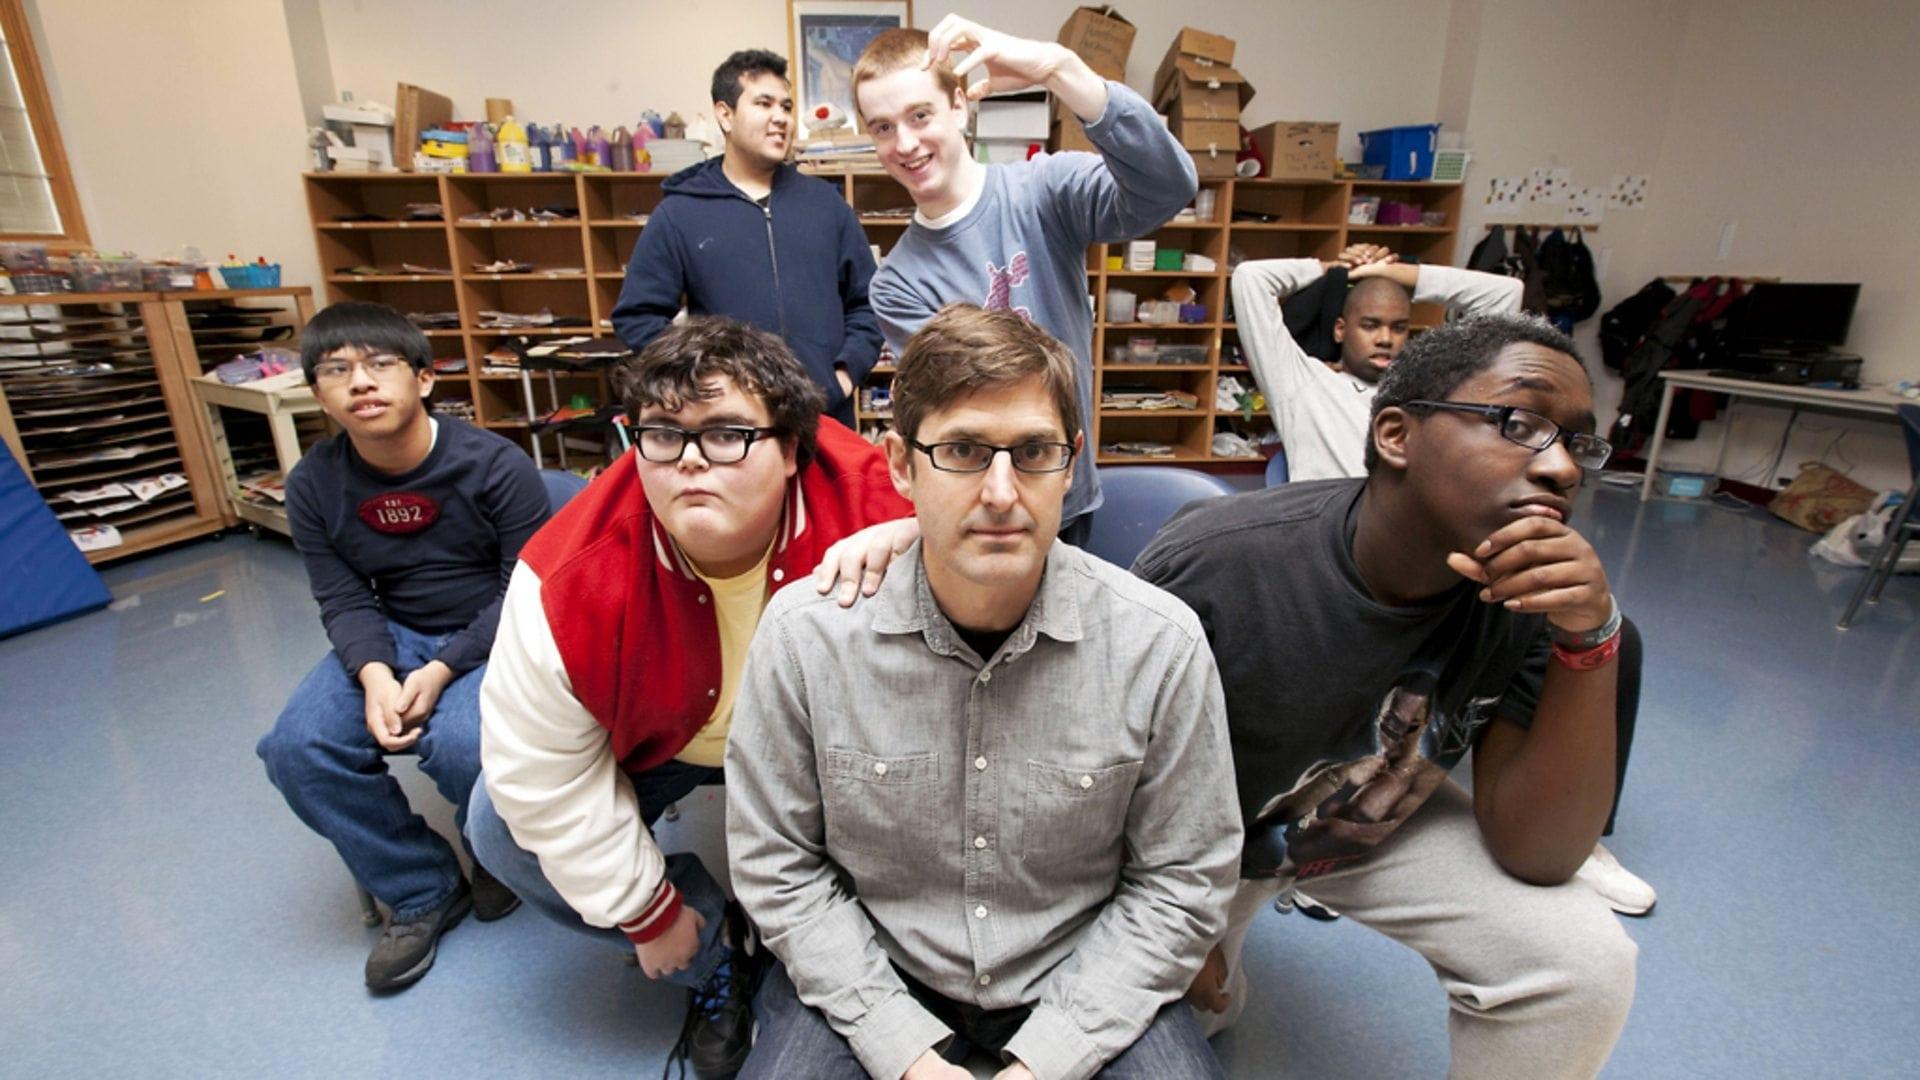 Louis Theroux: Extreme Love backdrop